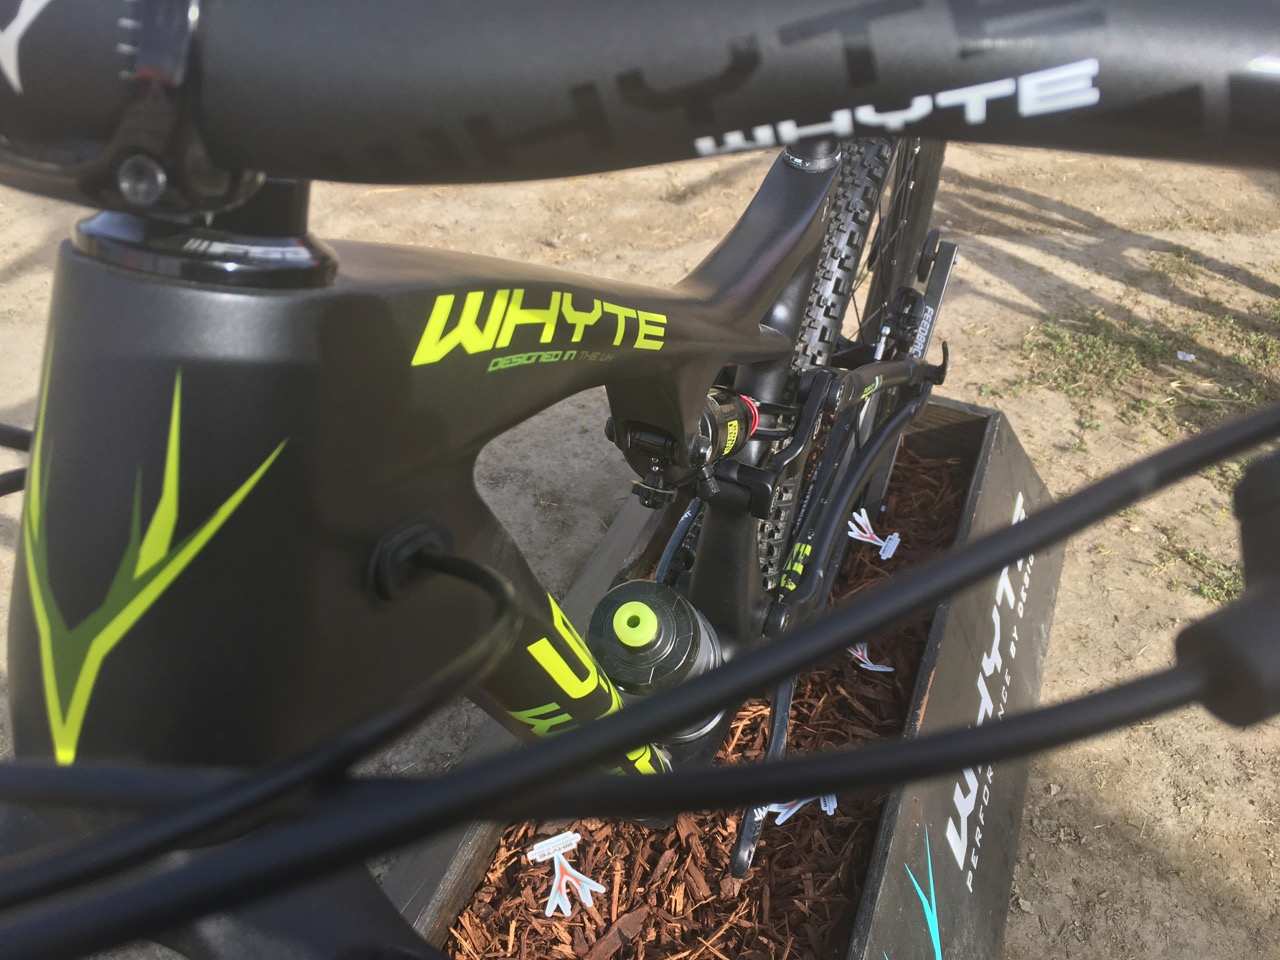 Whyte S-150